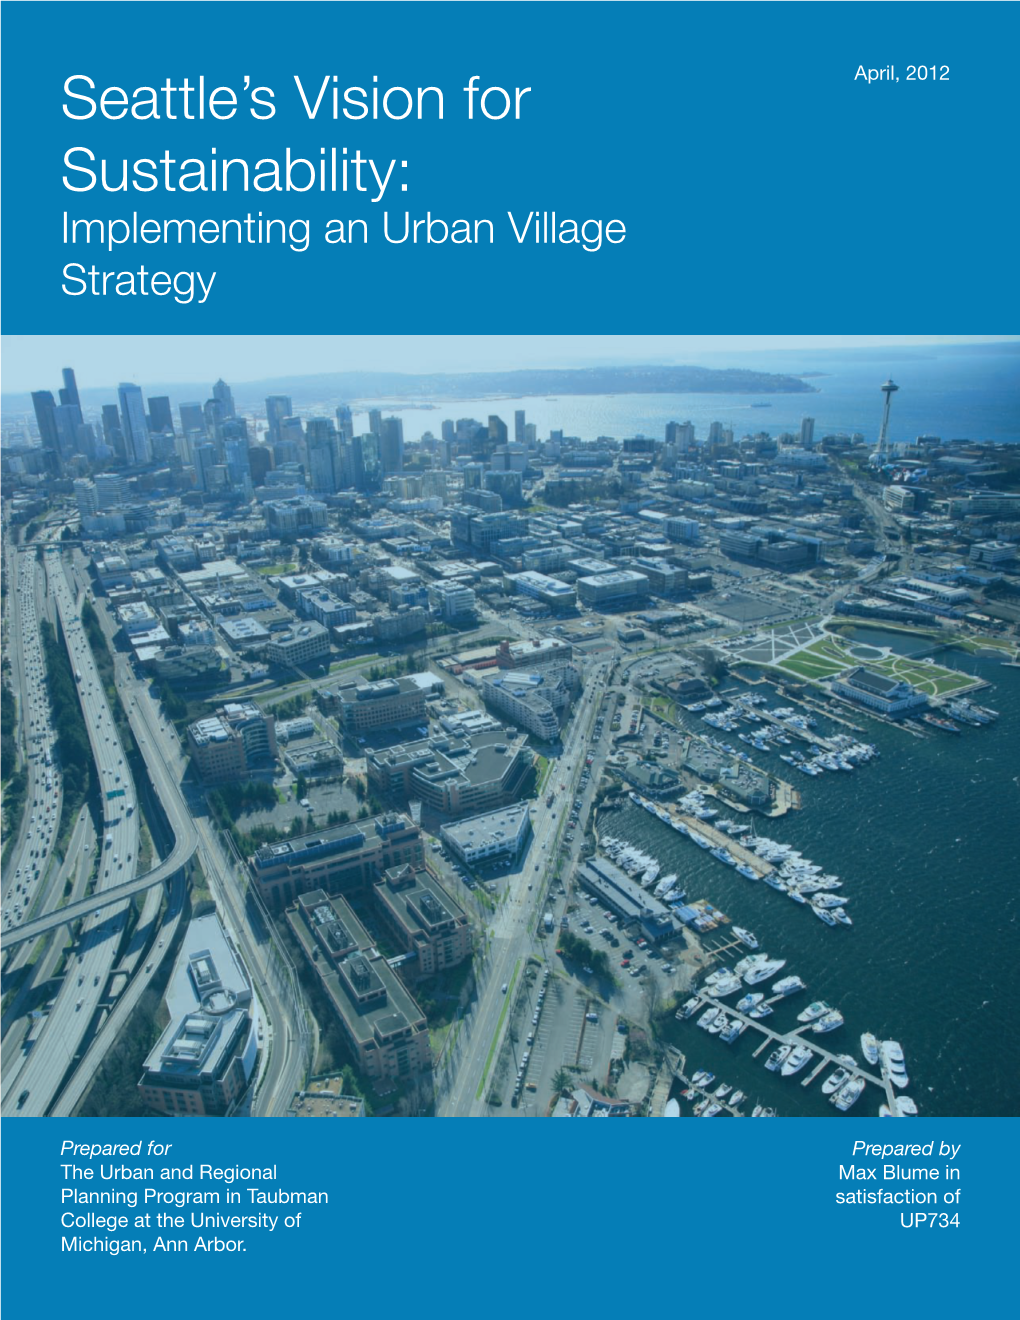 Seattle's Vision for Sustainability